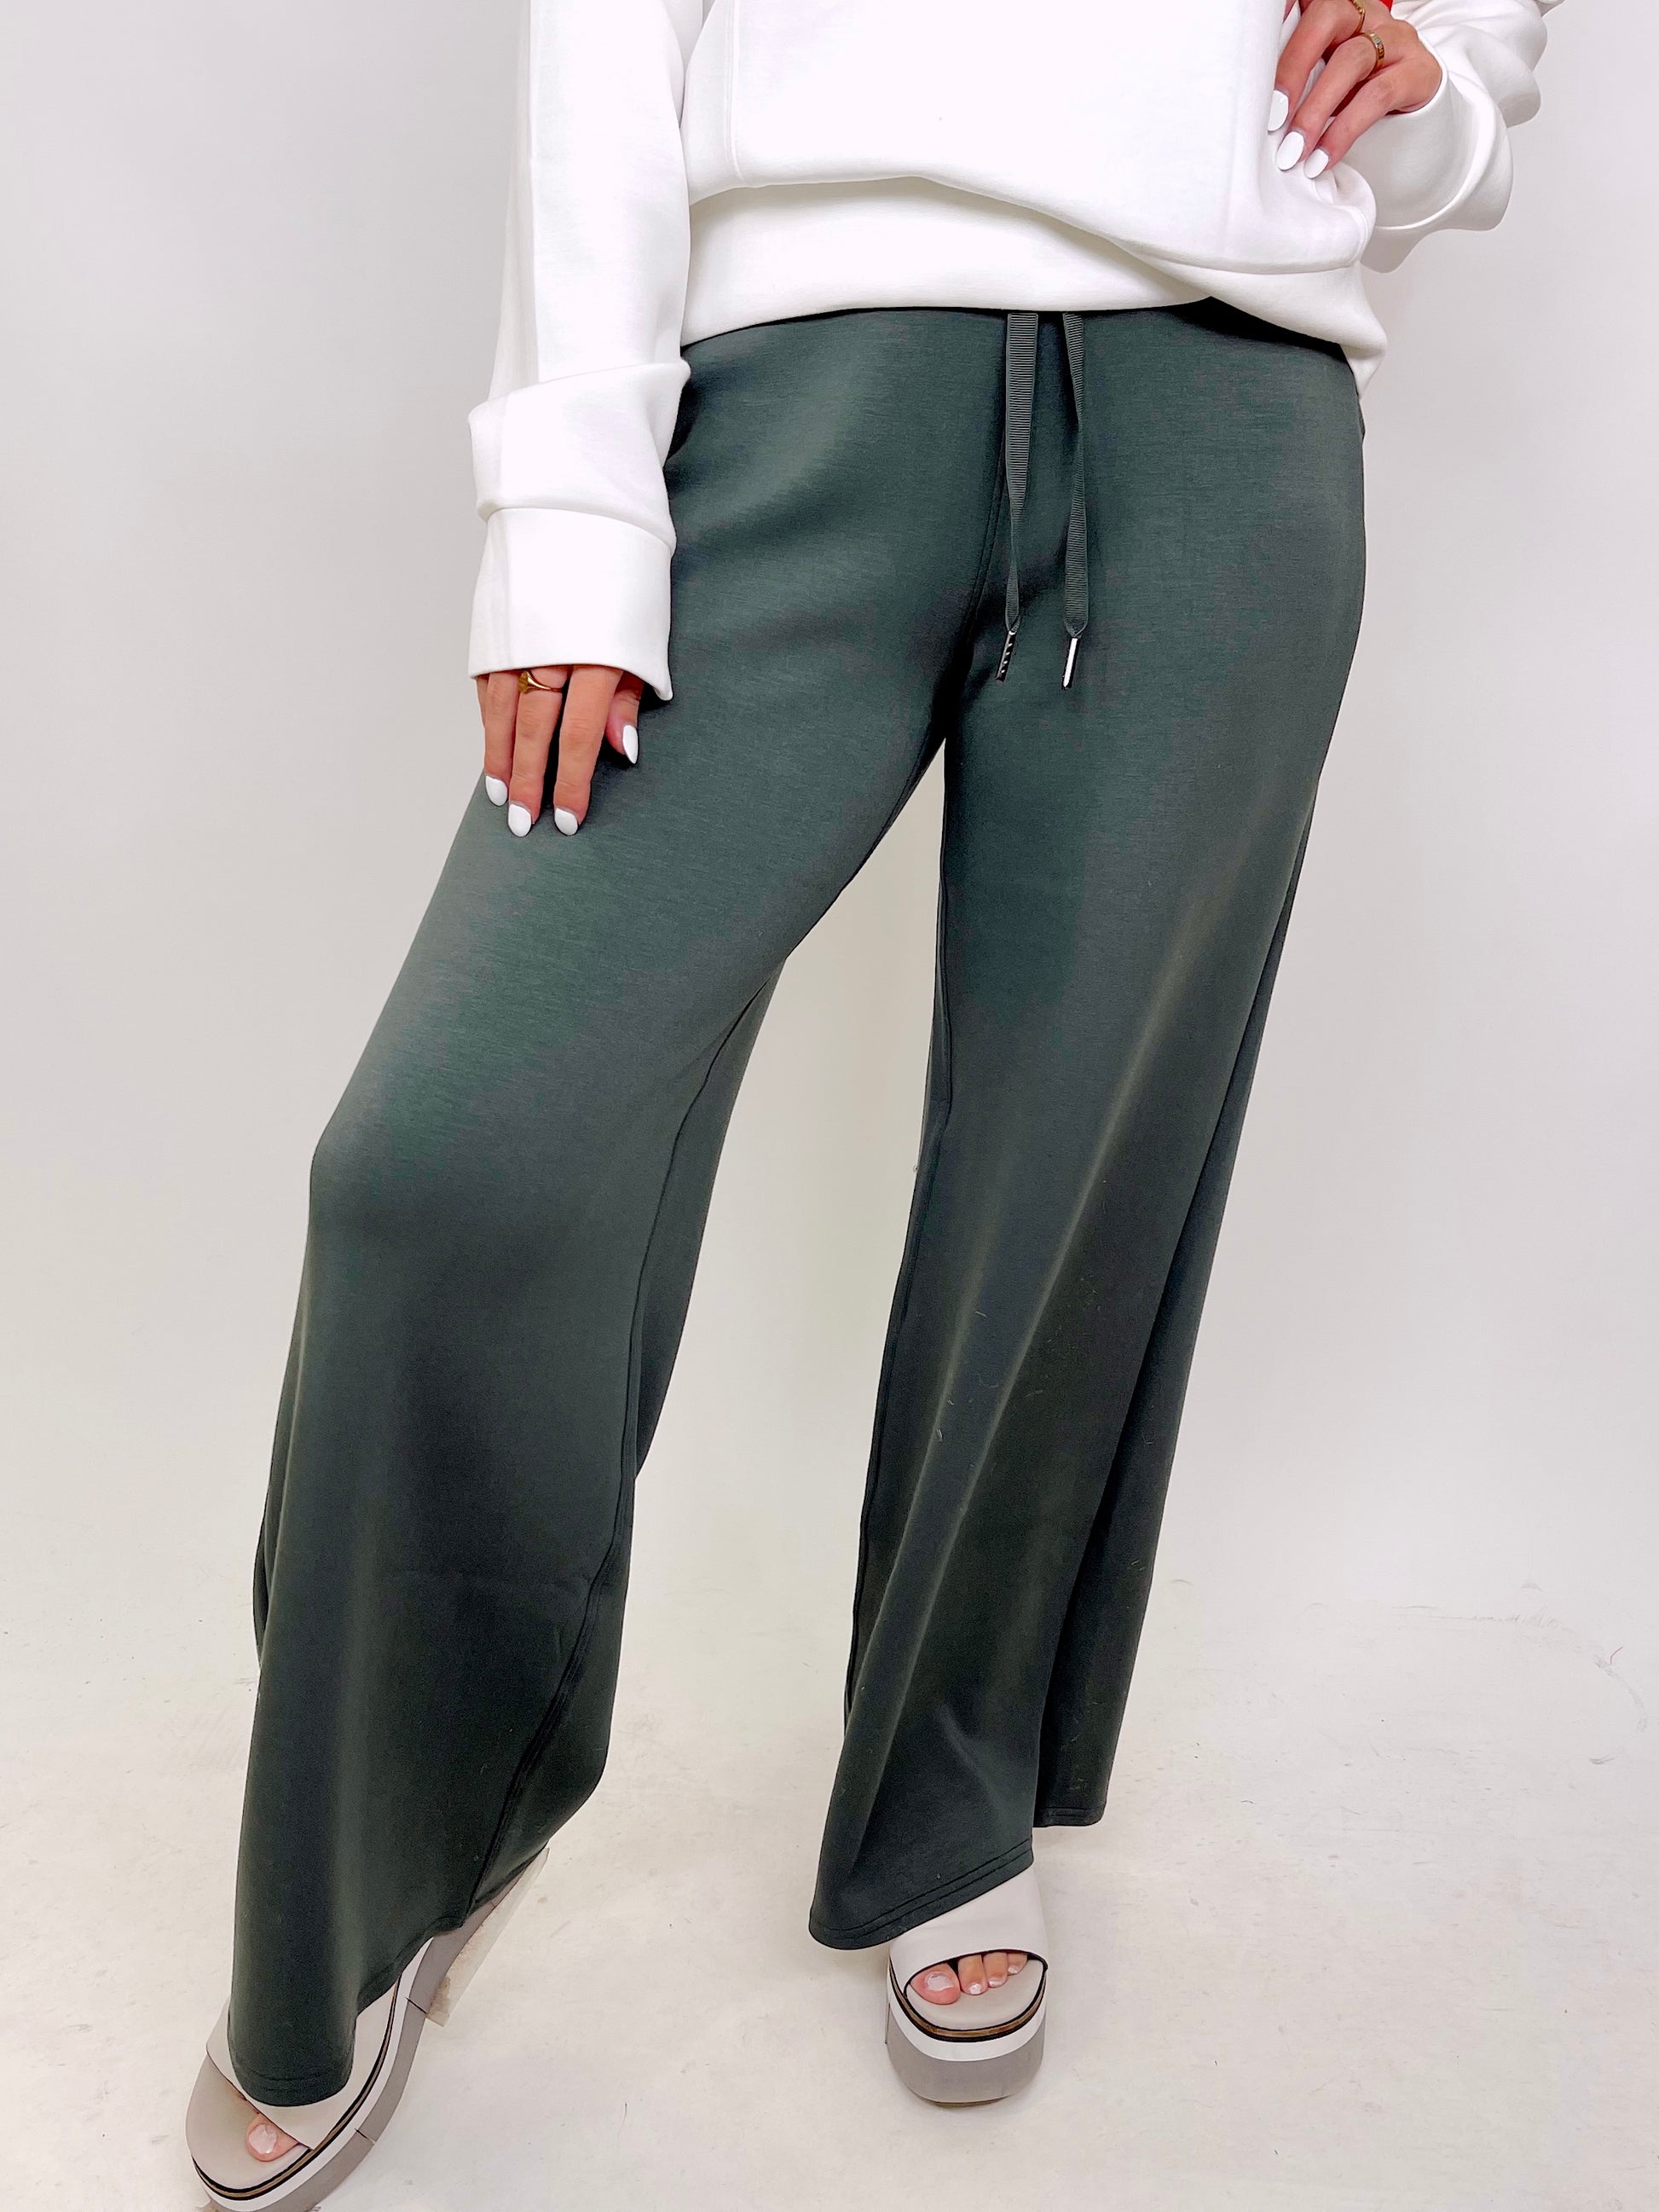 Spanx AirEssentials Wide Leg Pant-Lounge Pants-Spanx-The Village Shoppe, Women’s Fashion Boutique, Shop Online and In Store - Located in Muscle Shoals, AL.